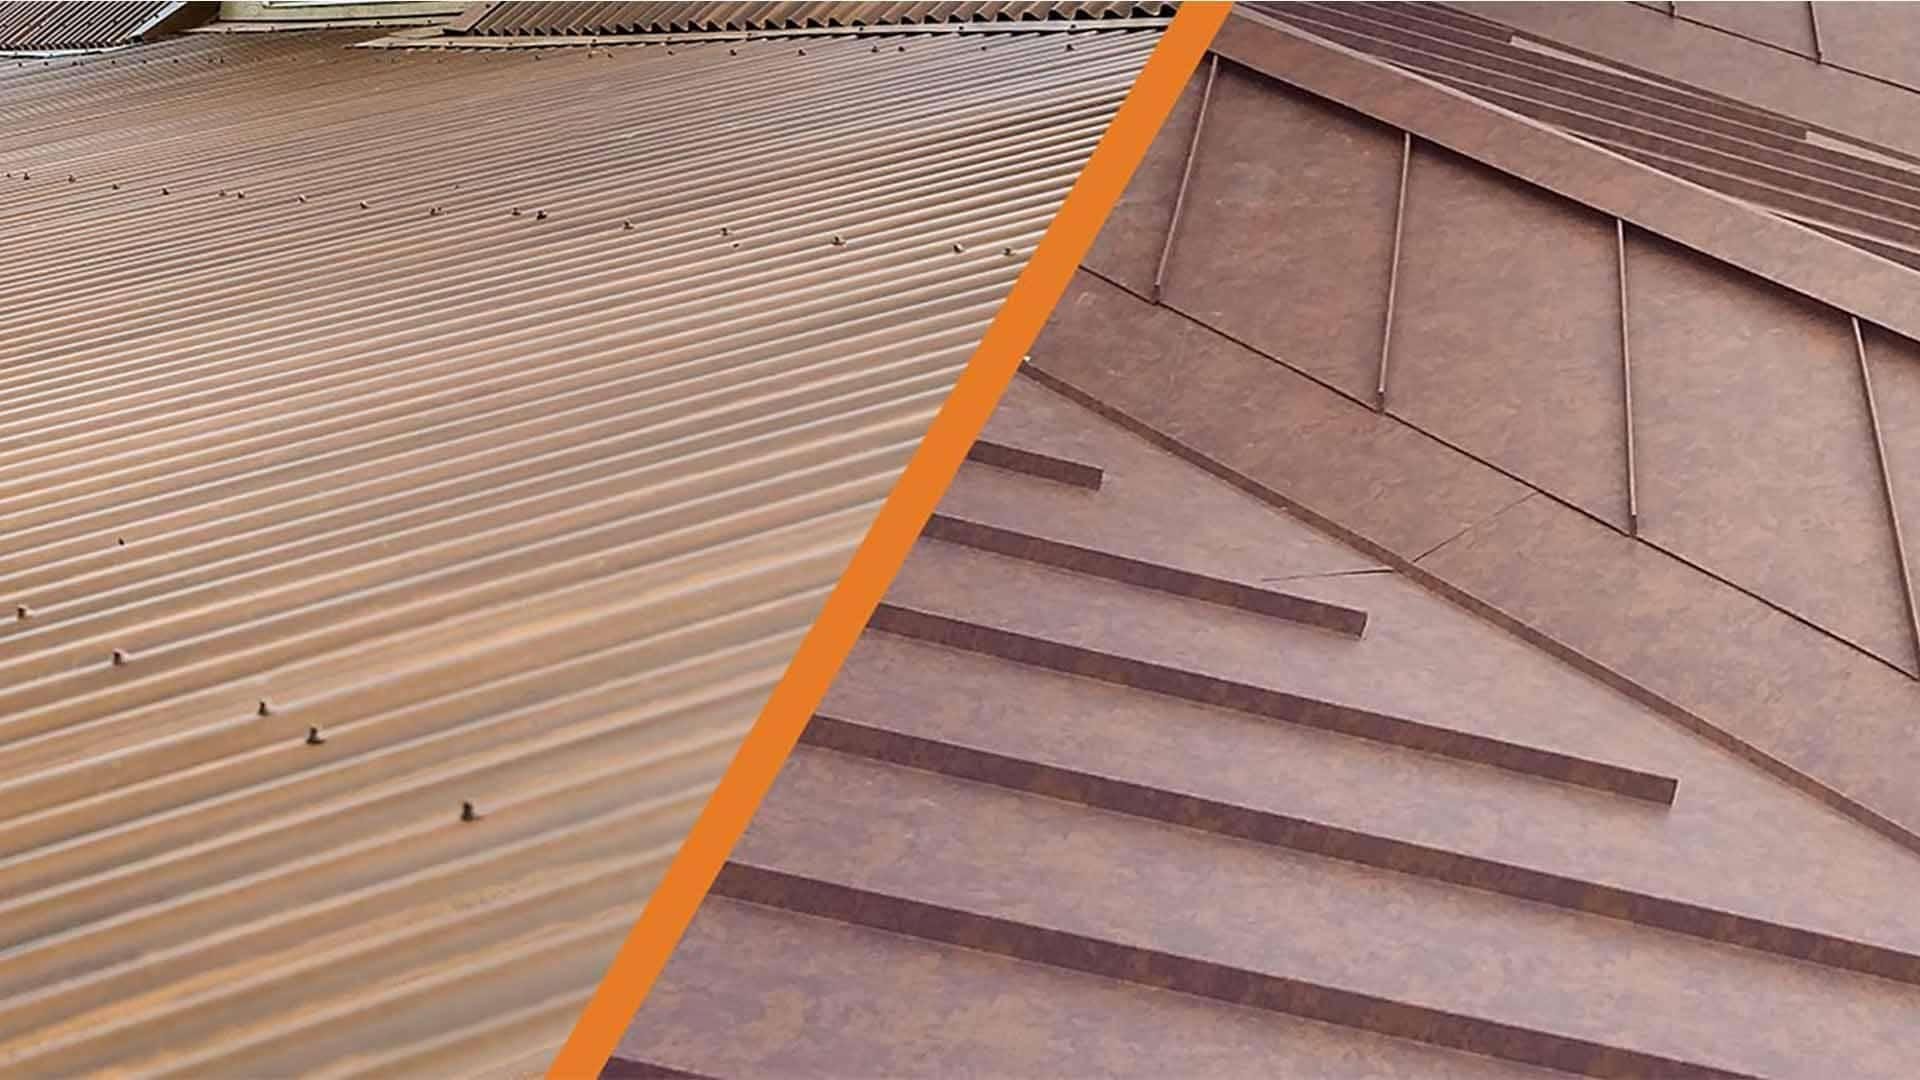 Corrugated Metal Roofing v. Standing Seam (Pros & Cons)